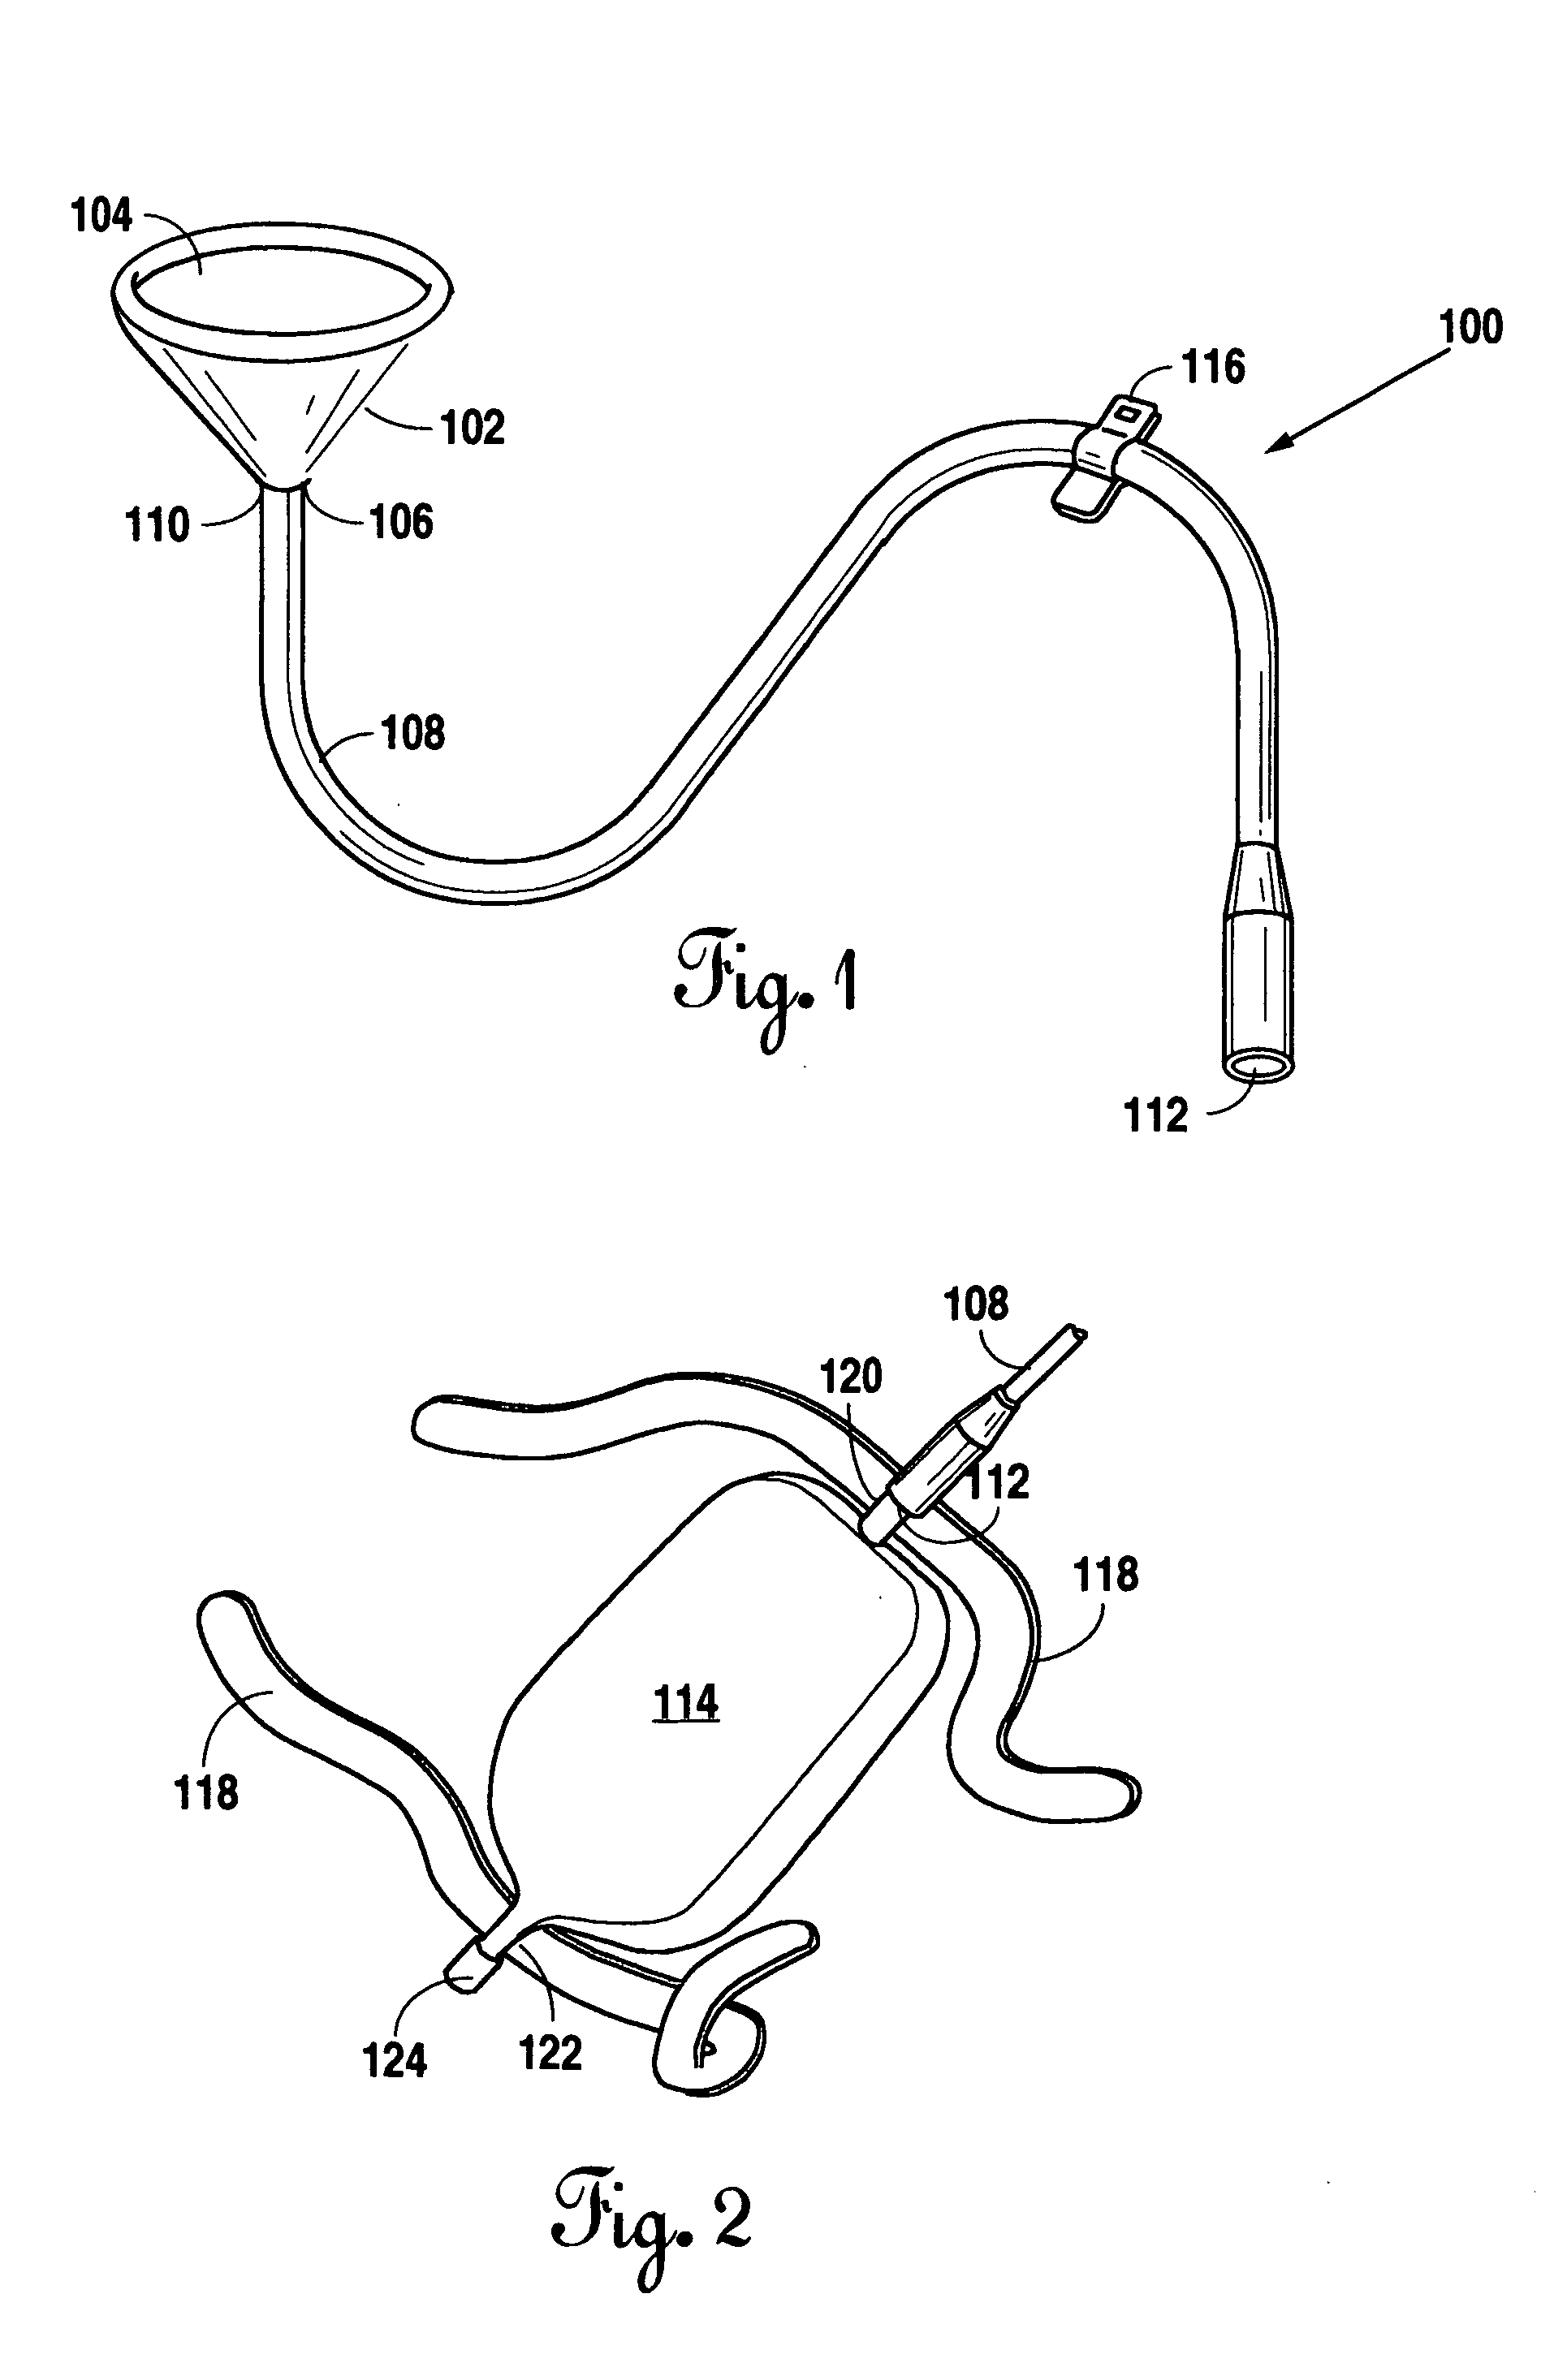 Vesicovaginal incontinence device and method of use